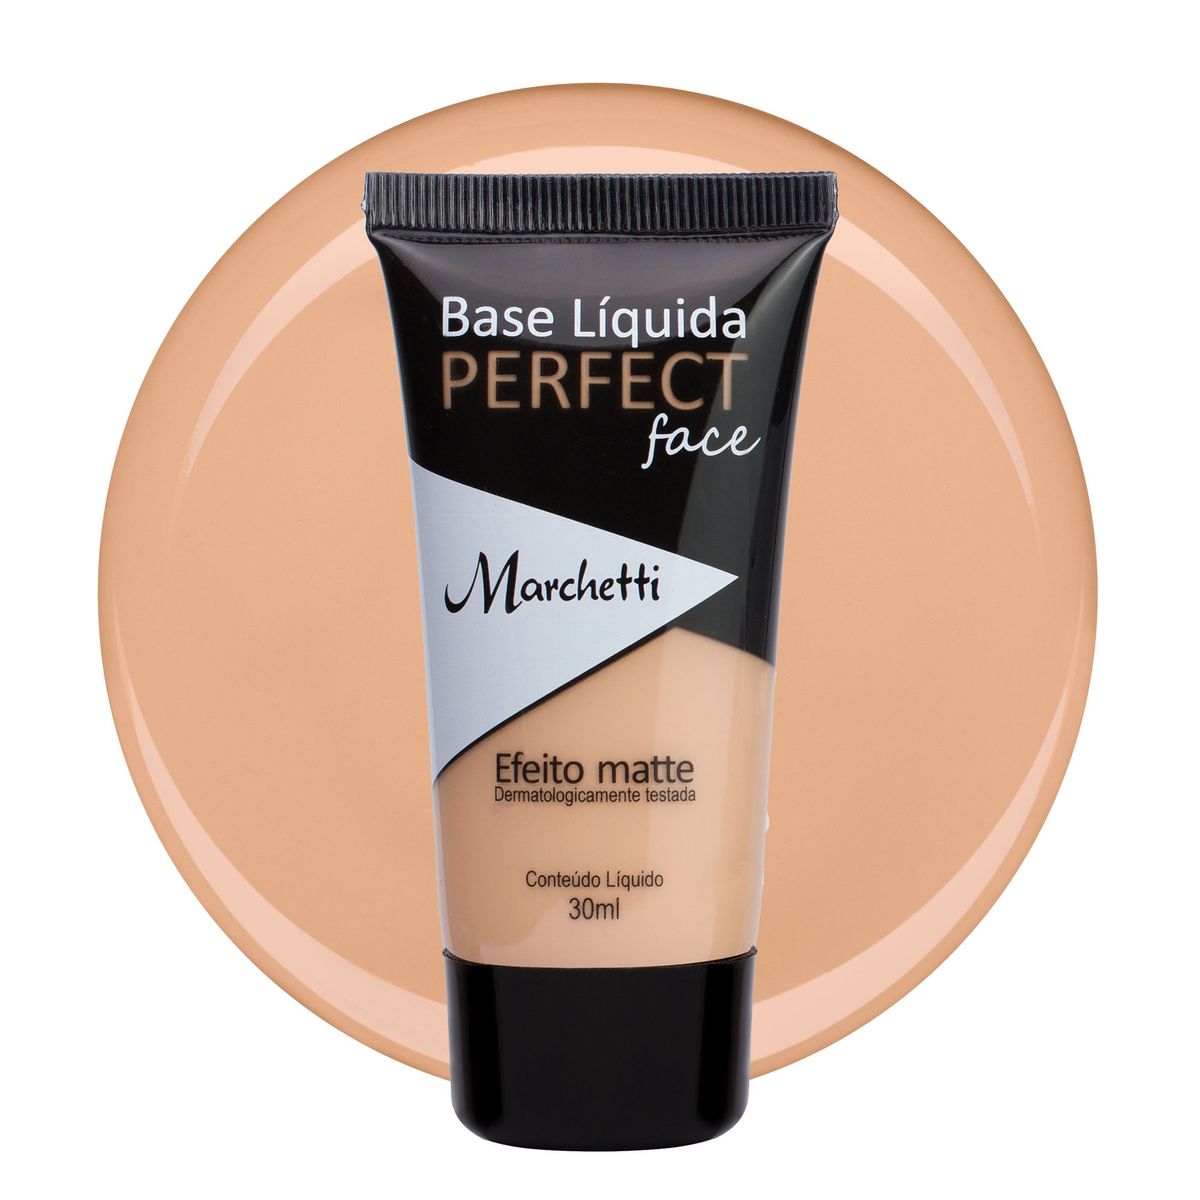 Base Líquida Marchetti Perfect Face 5 Bege 30ml image number 0